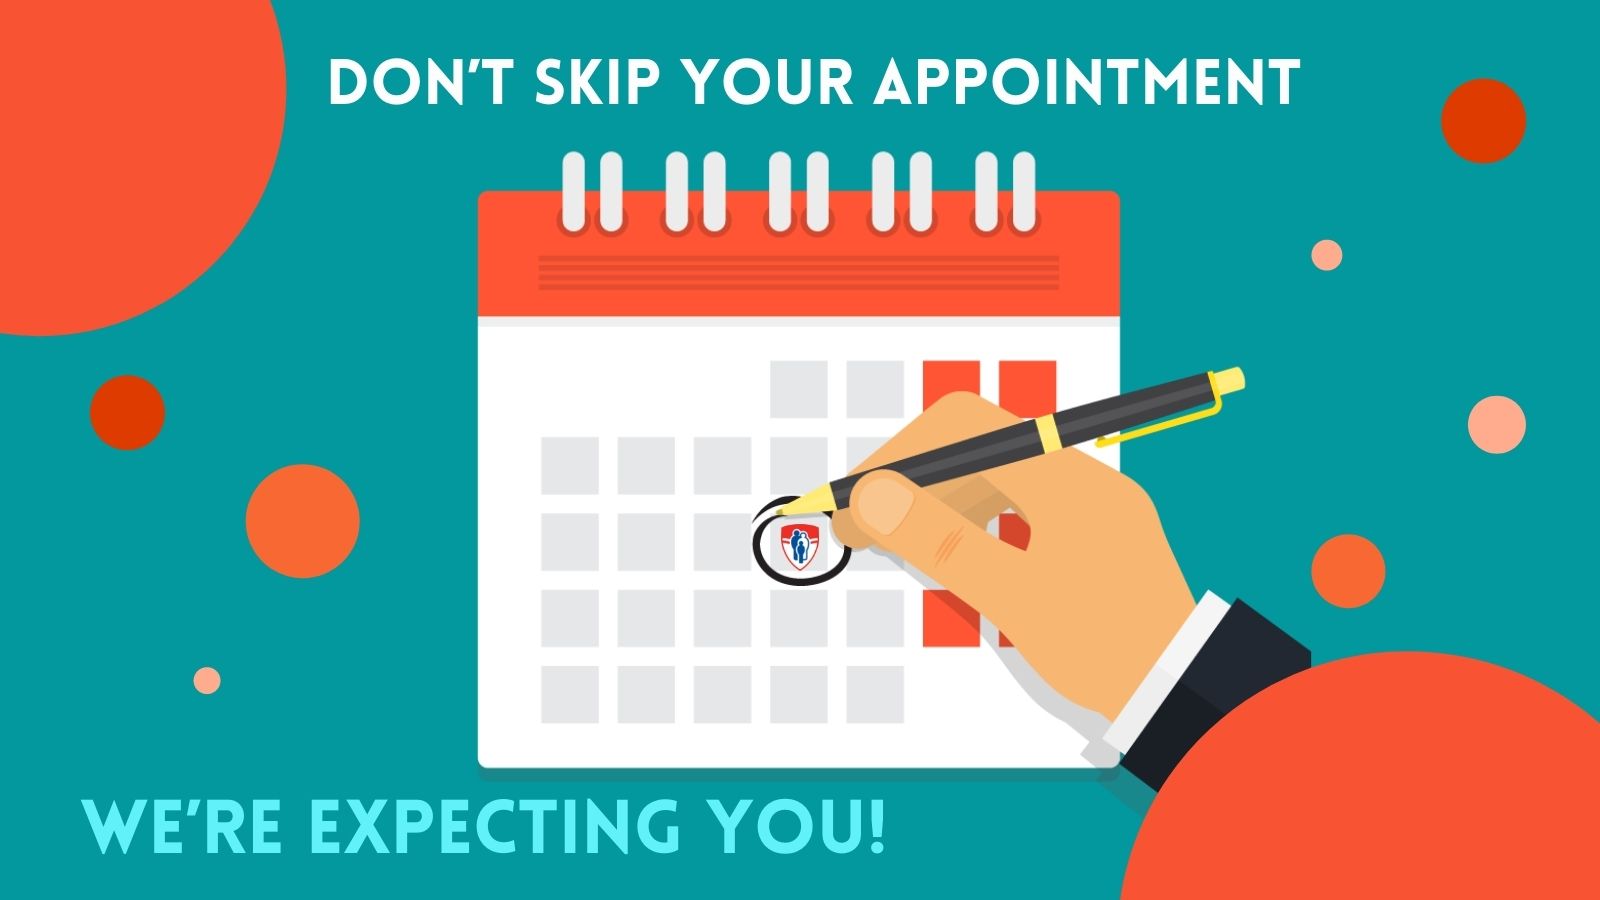 Don't skip your appointment